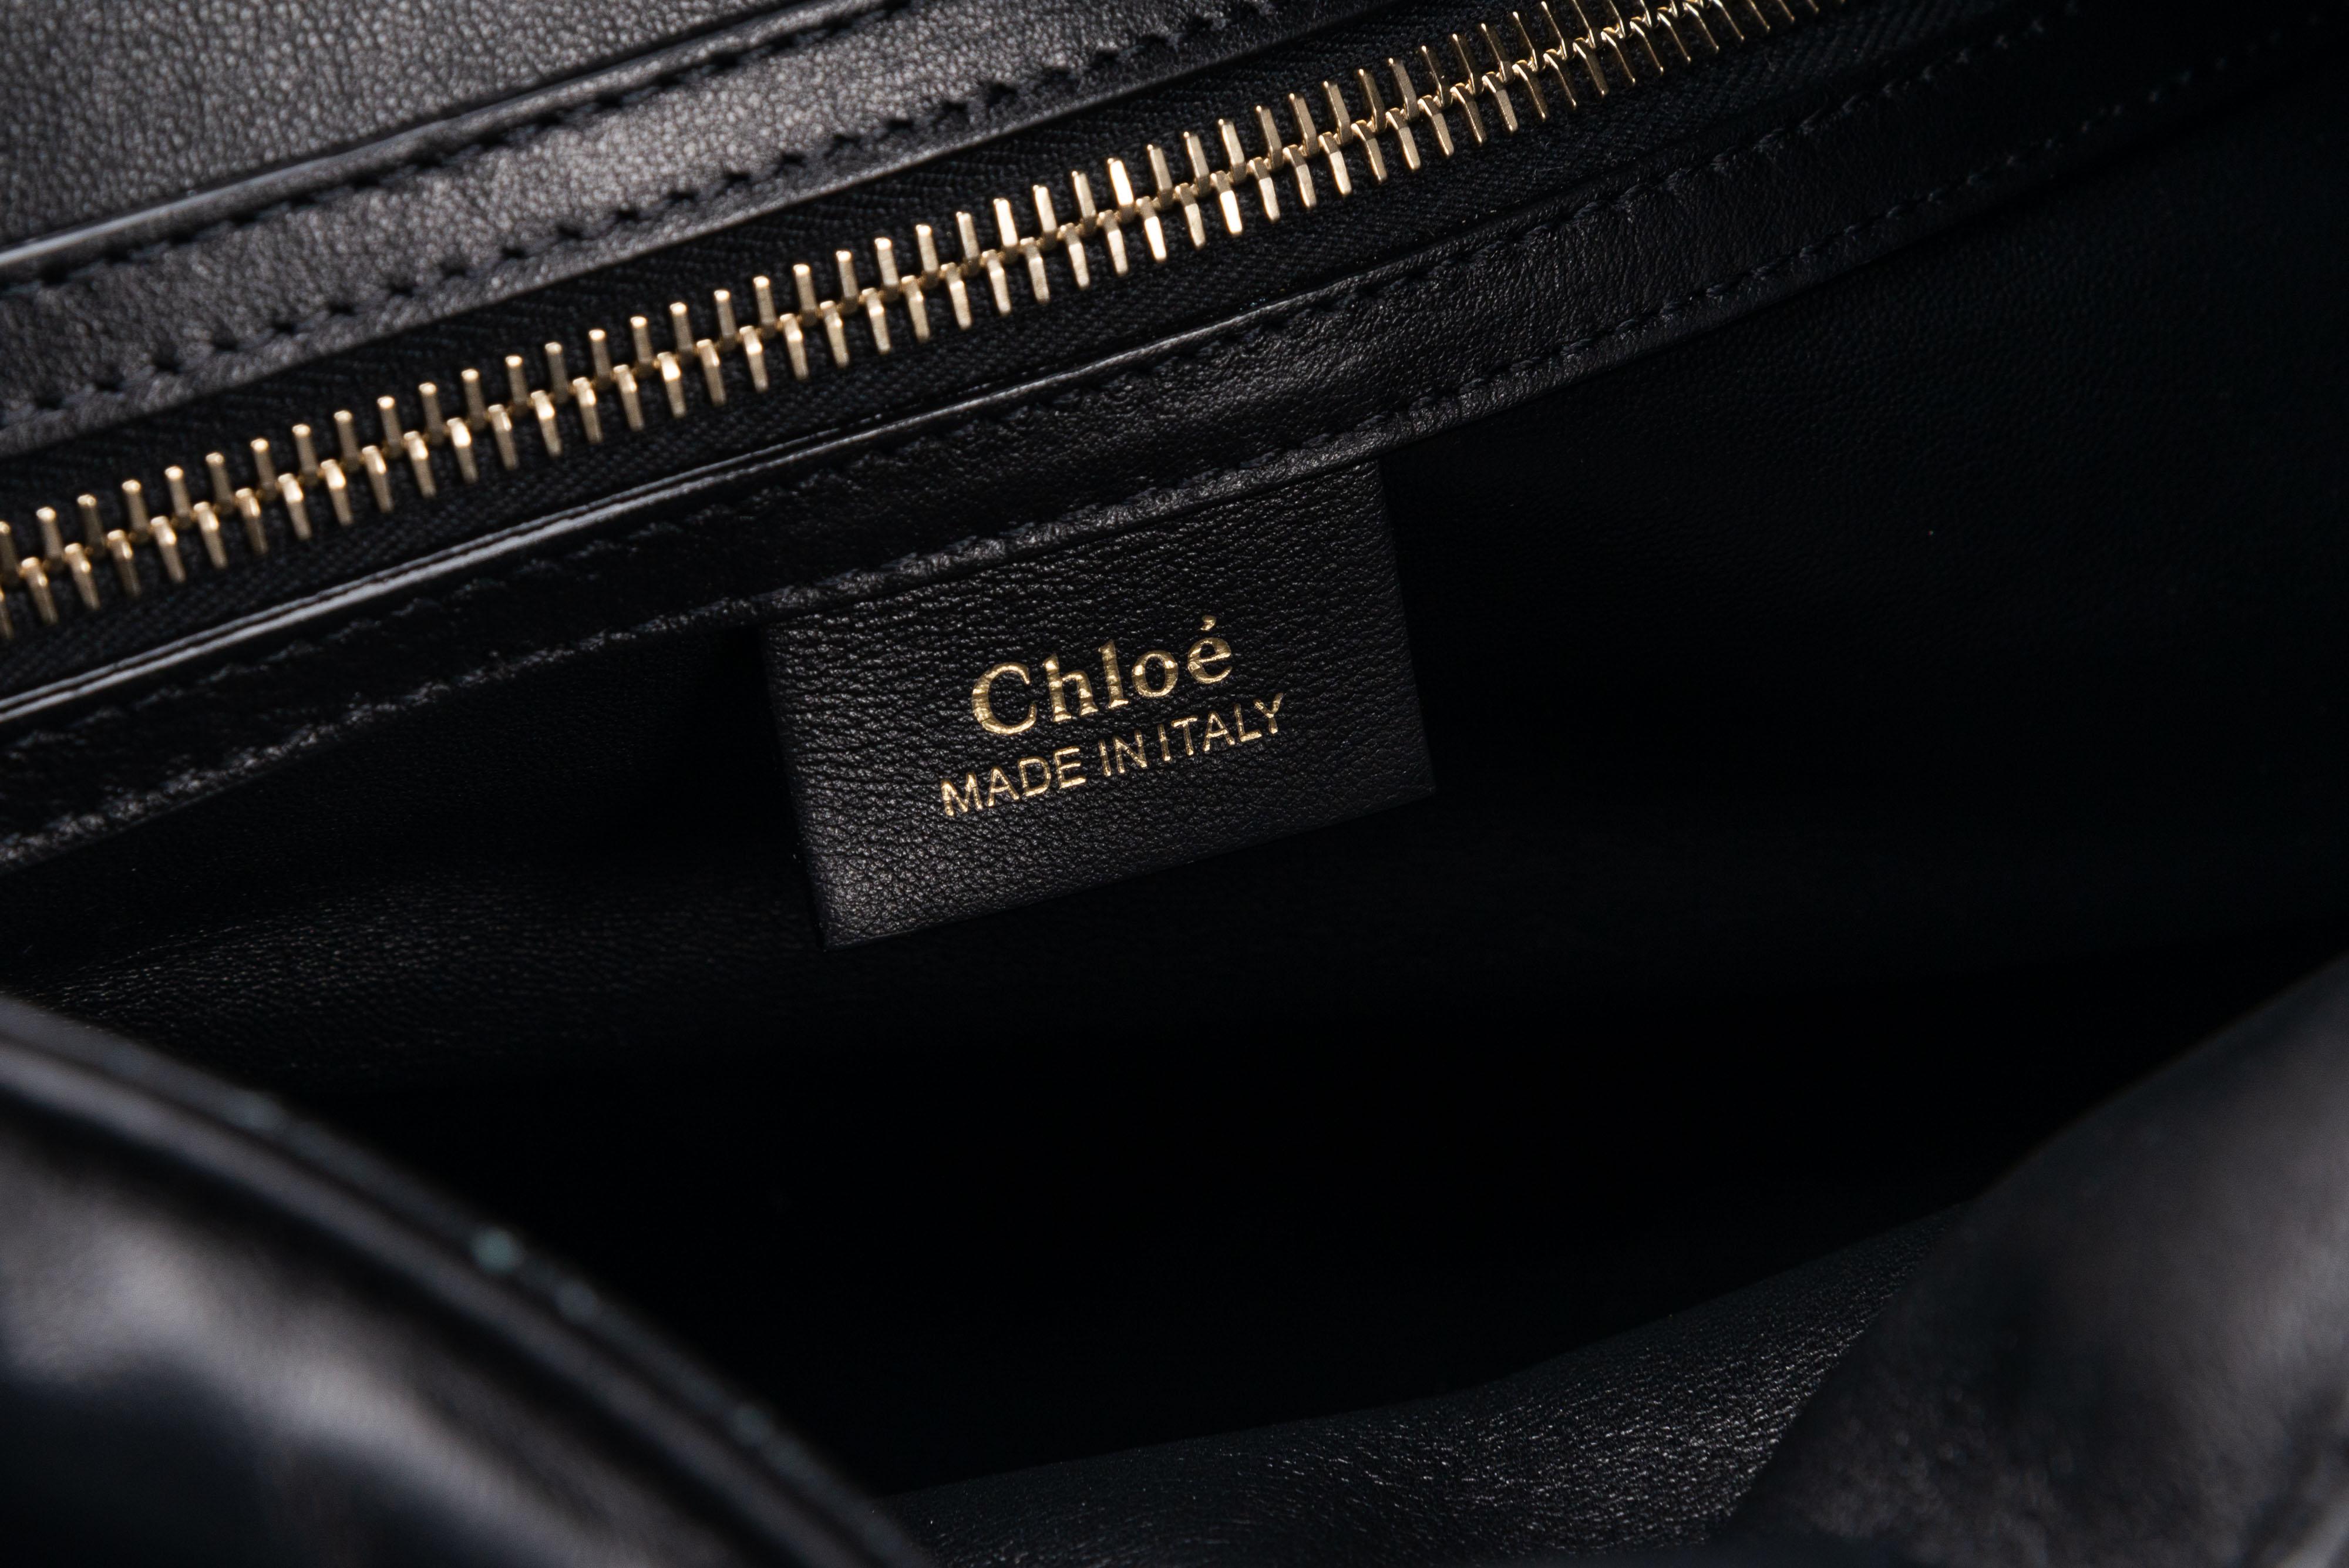 Chloe Juana Black Chain Bag Quilted Leather Rare For Sale 8